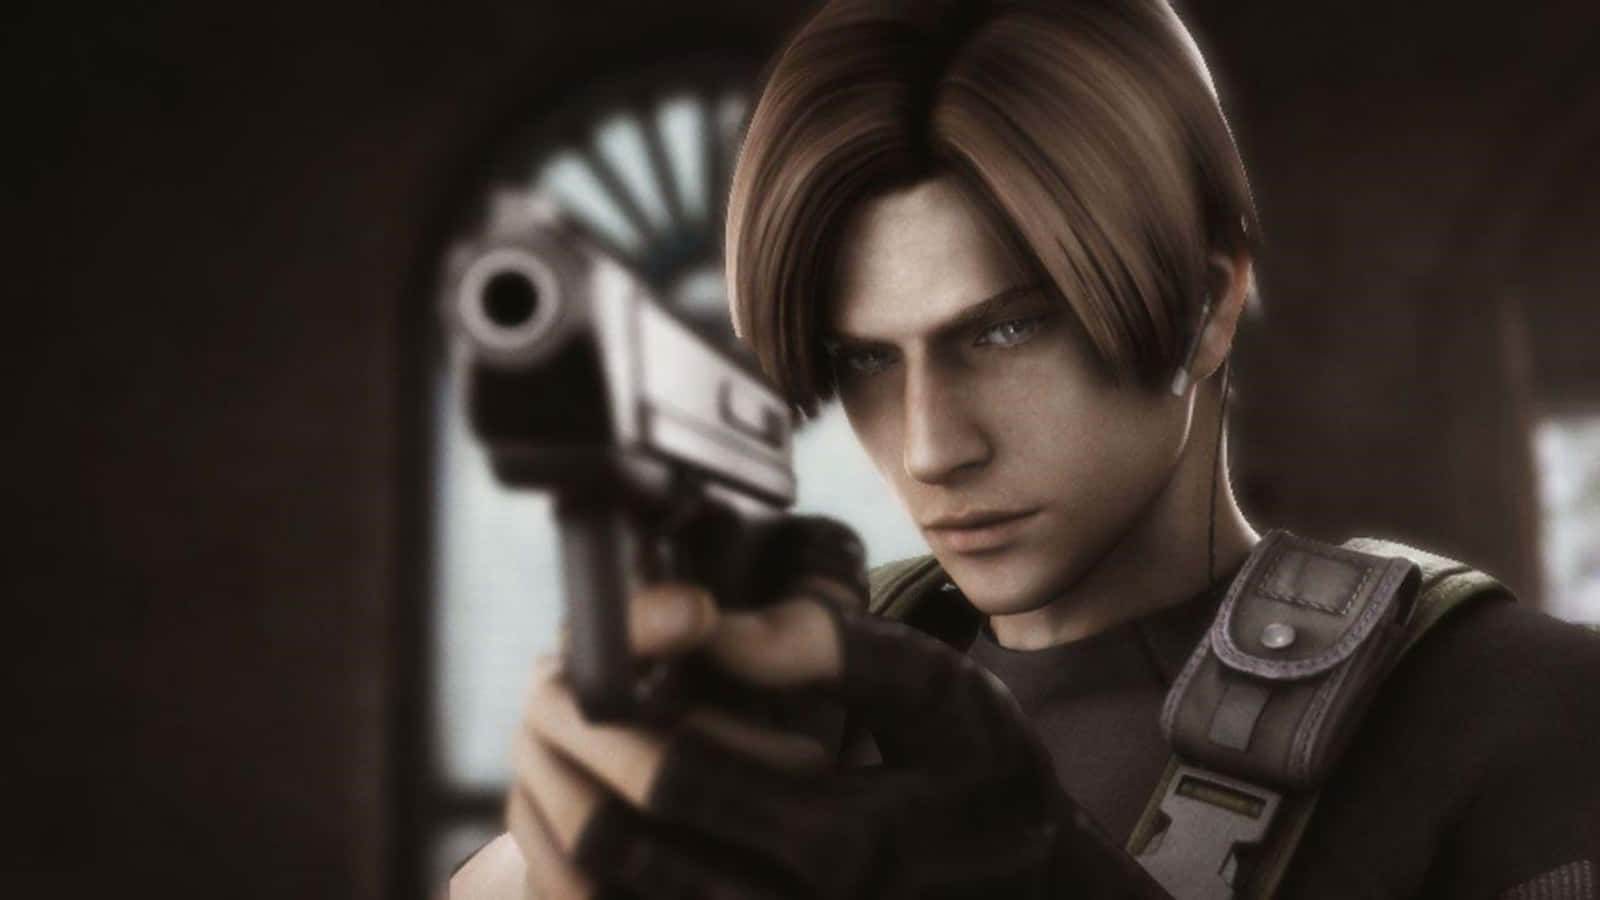 A Digital Portrait Of Leon S. Kennedy, The Iconic Protagonist From The Resident Evil Series. Wallpaper